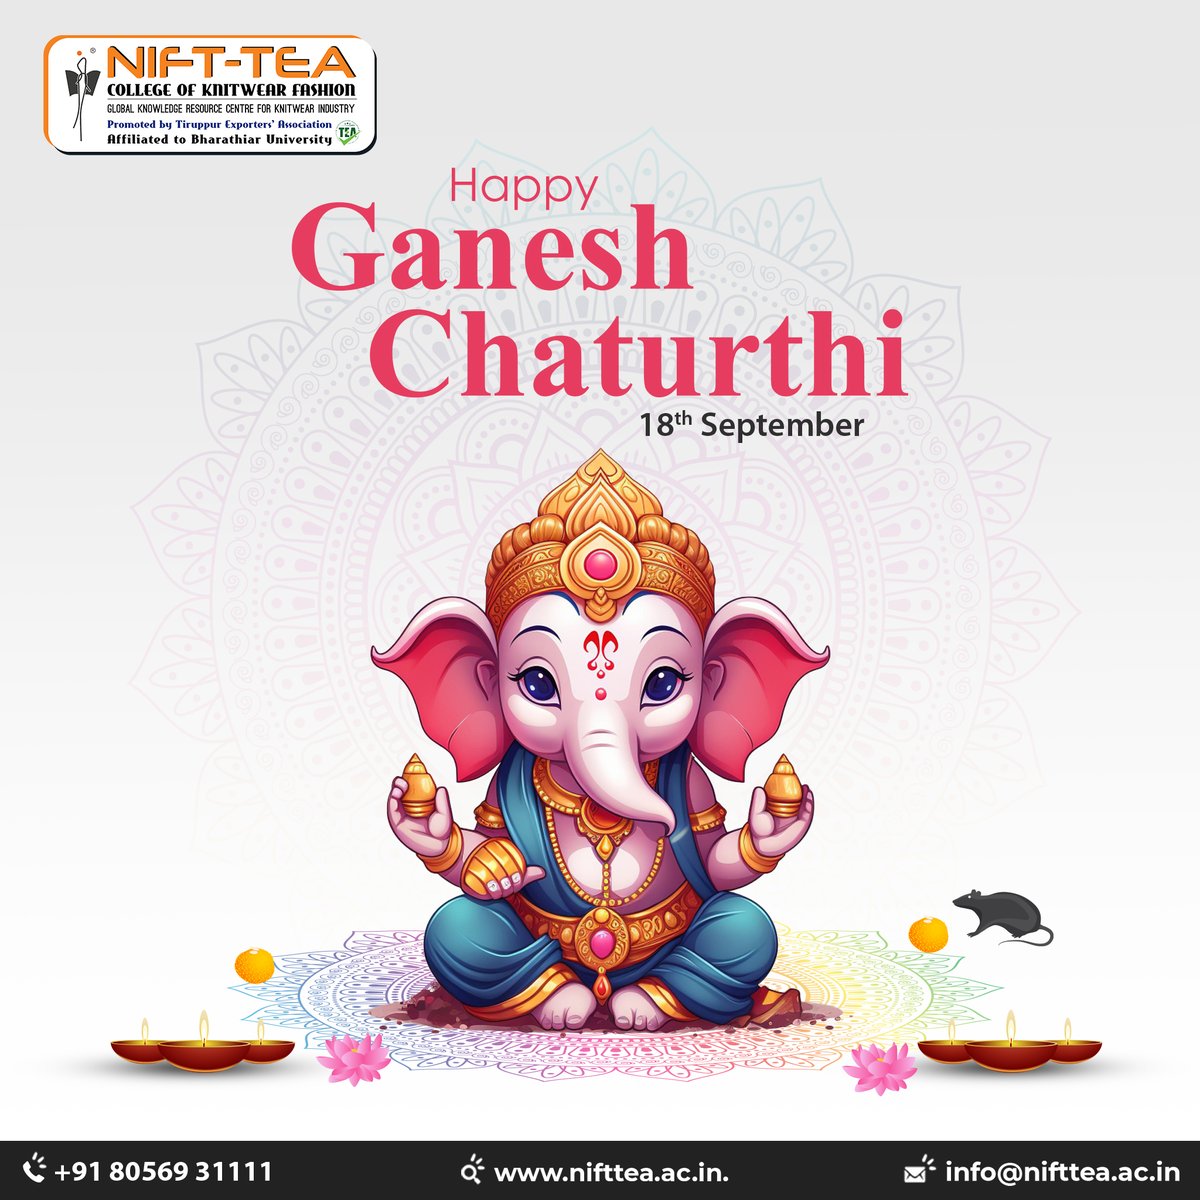 🪔 Celebrate the divine blessings of Lord Ganesha on this auspicious Ganesh Chaturthi at NIFT-TEA College of Knitwear Fashion! 🙏 
#ganeshchaturthi #ganeshchaturthi2023 #GaneshChaturthiSpecial #ganeshchaturthicelebrations #NIFTTEA #FashionBlessings #GaneshaFestival #CreativeVibes